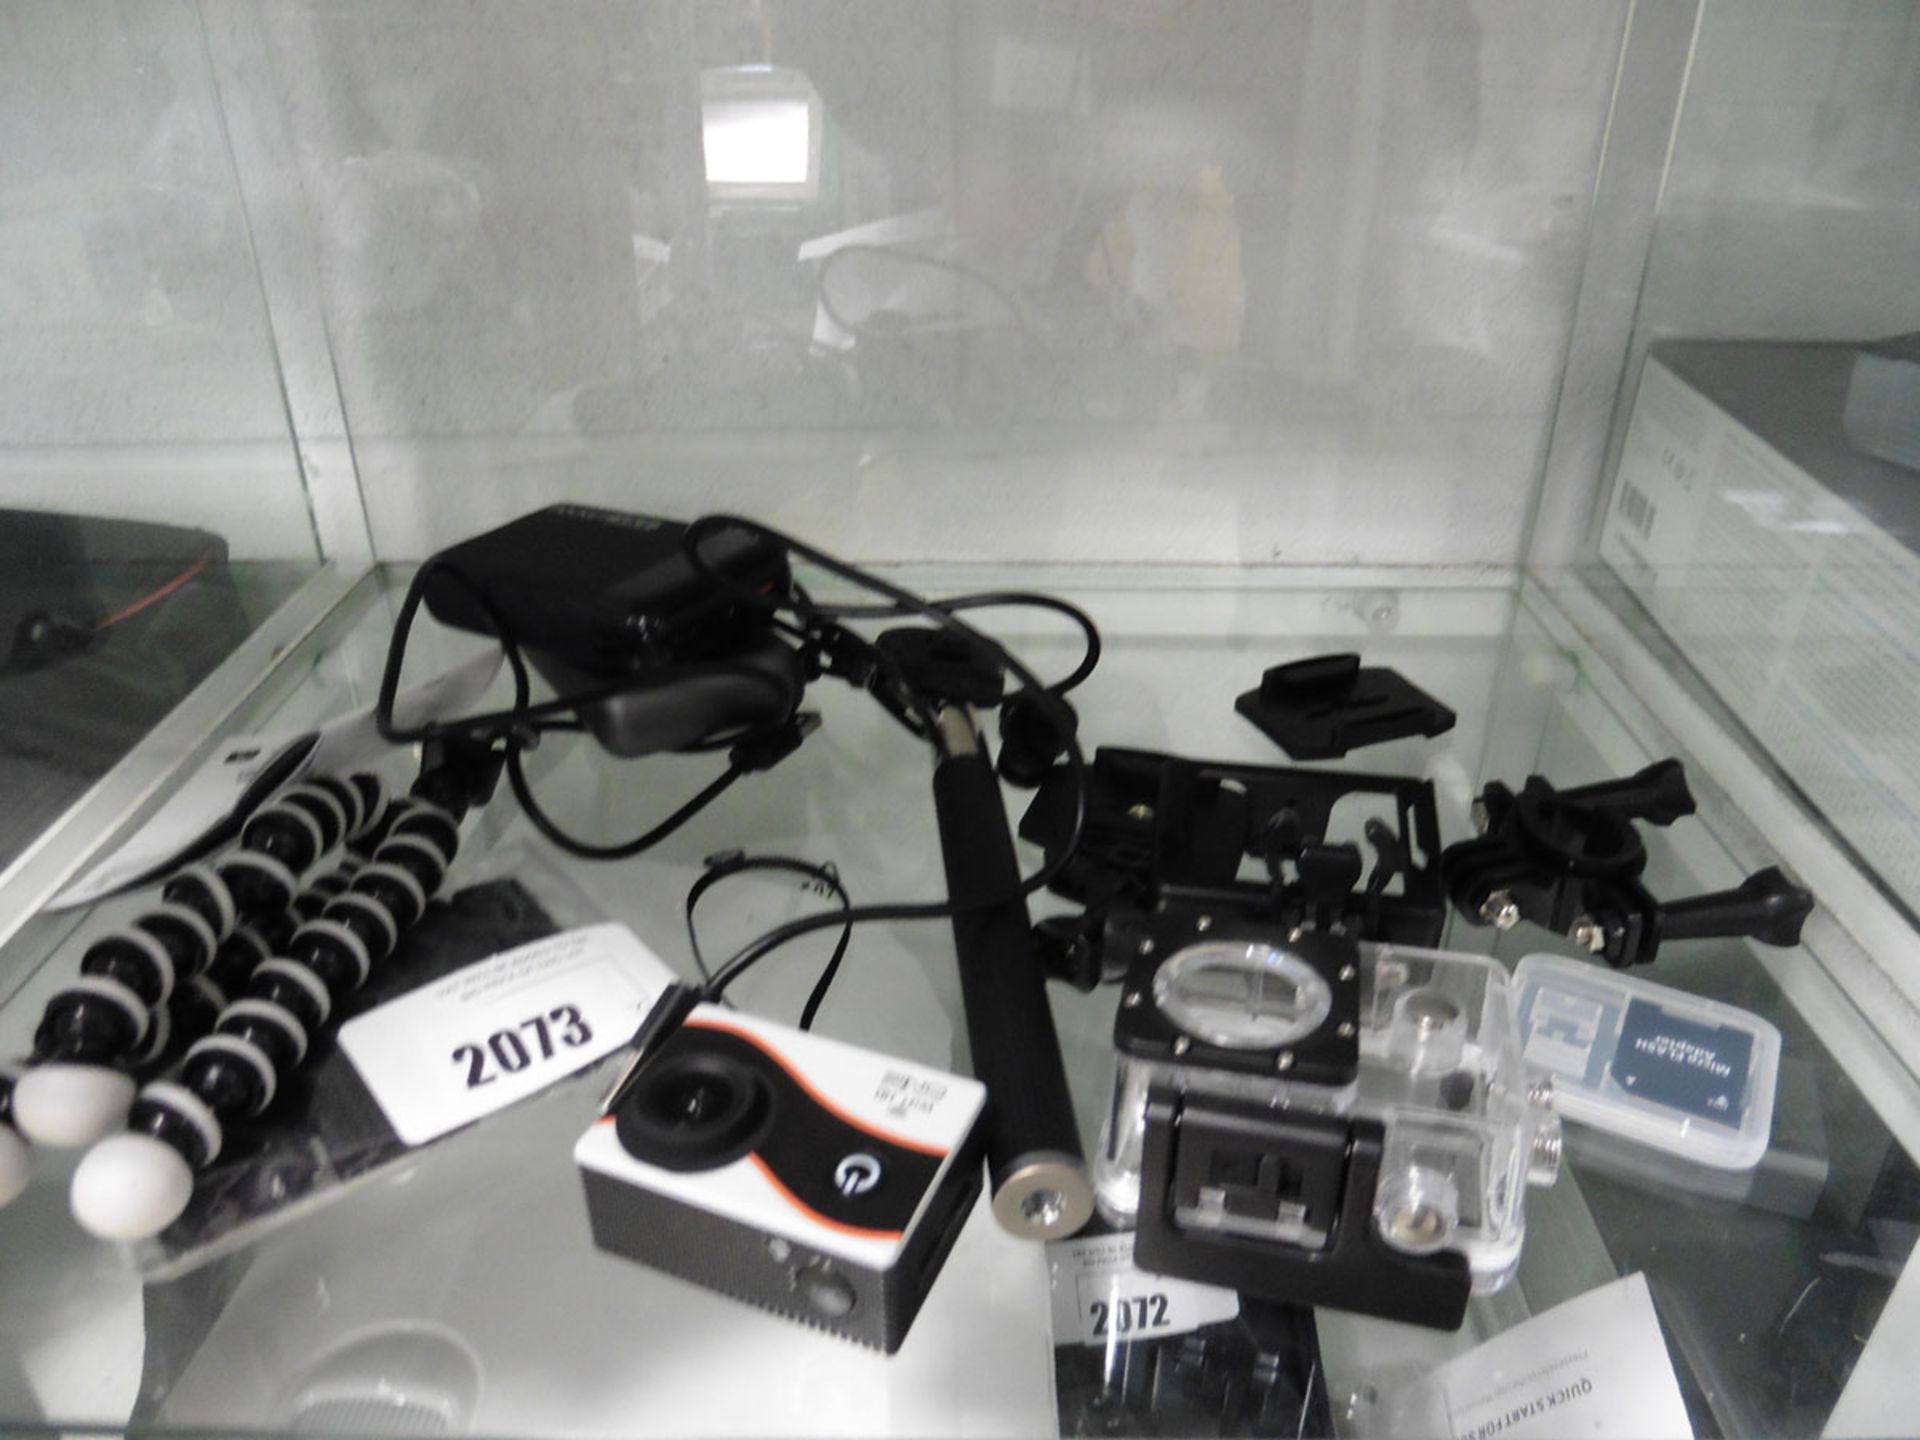 One Wifi action camera, 2 battery power banks and other accessories